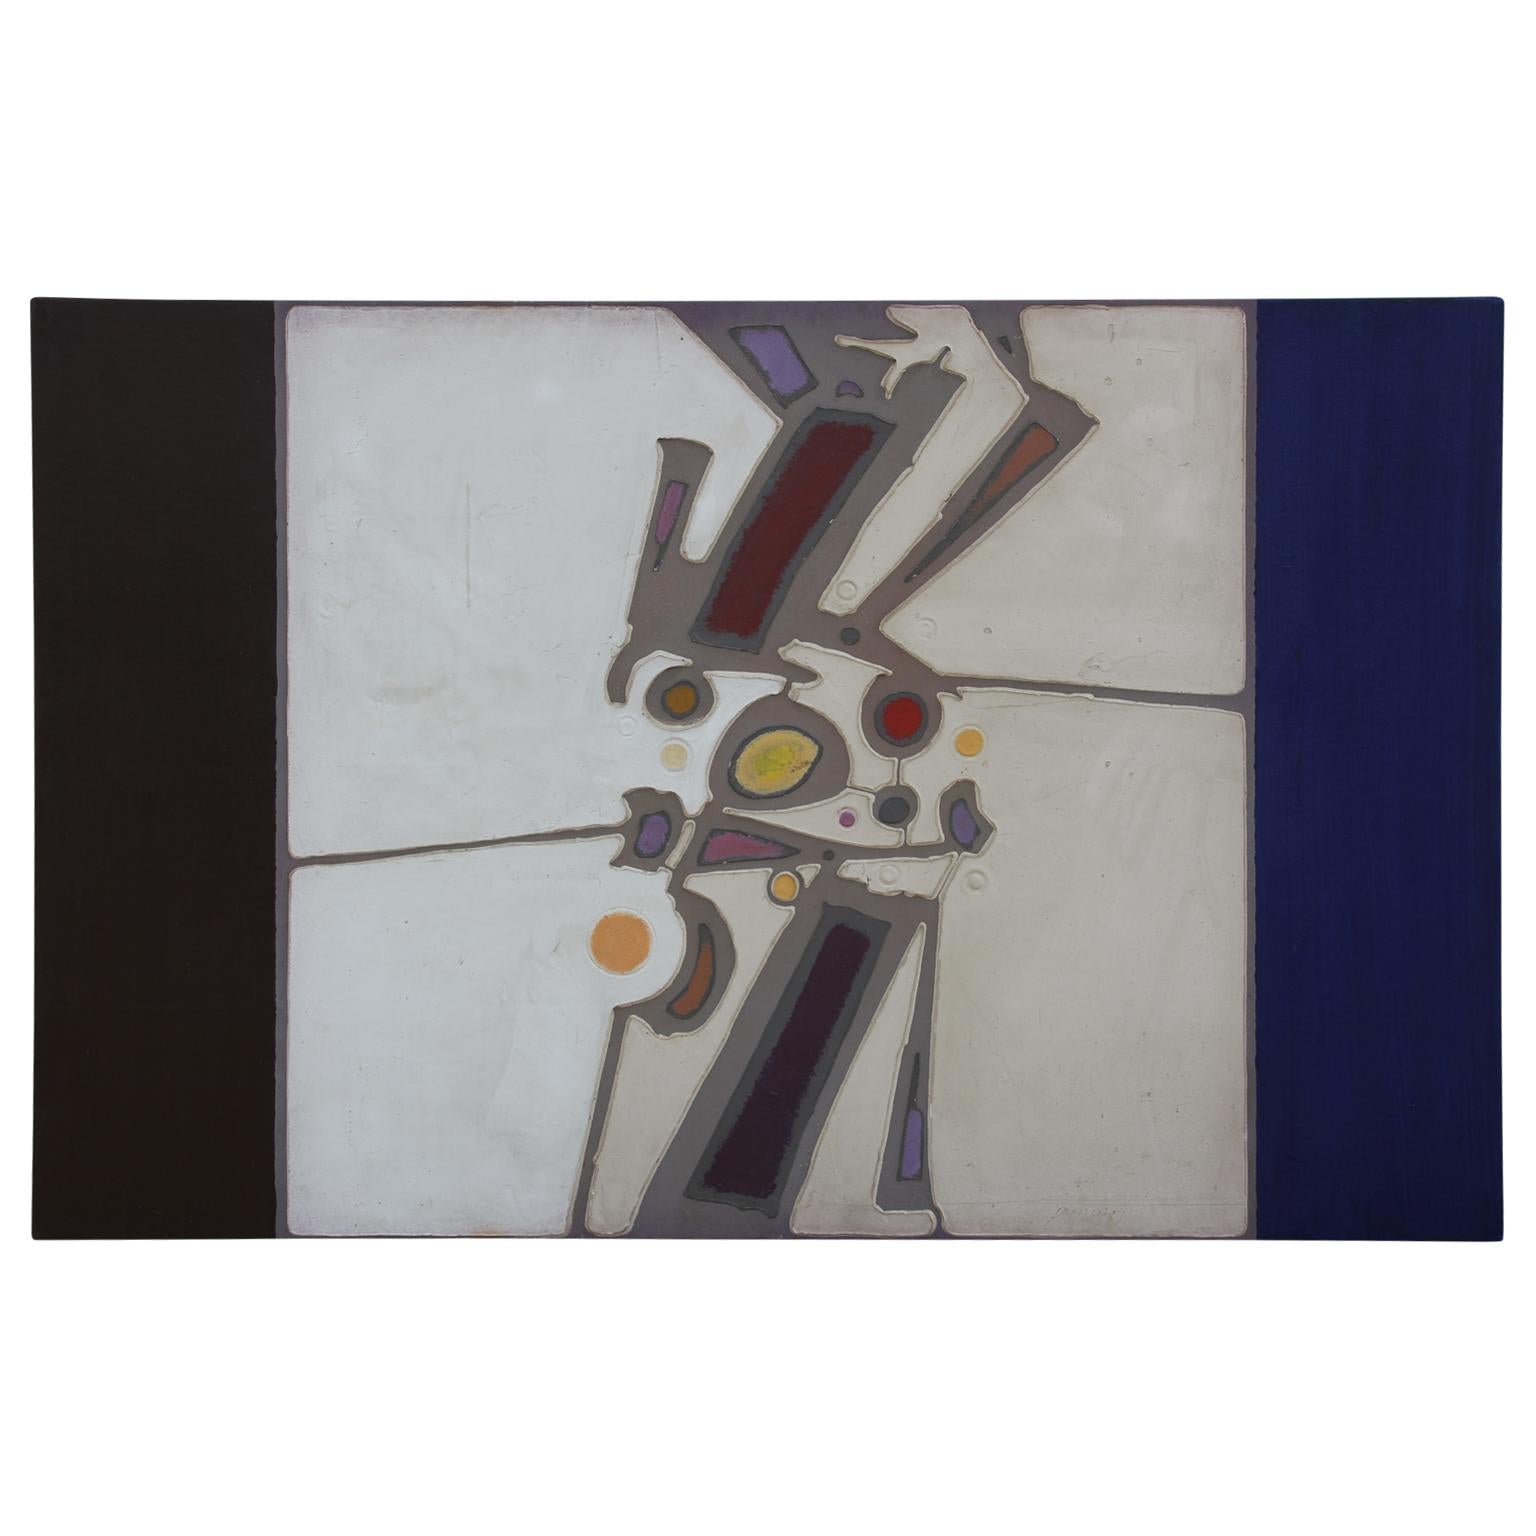 Geometric modern style painting with shapes suspended in a white background. The white background and the shapes are elevated off of the surface of the board. The painting is signed and dated by the artist in the bottom corner. The piece is not